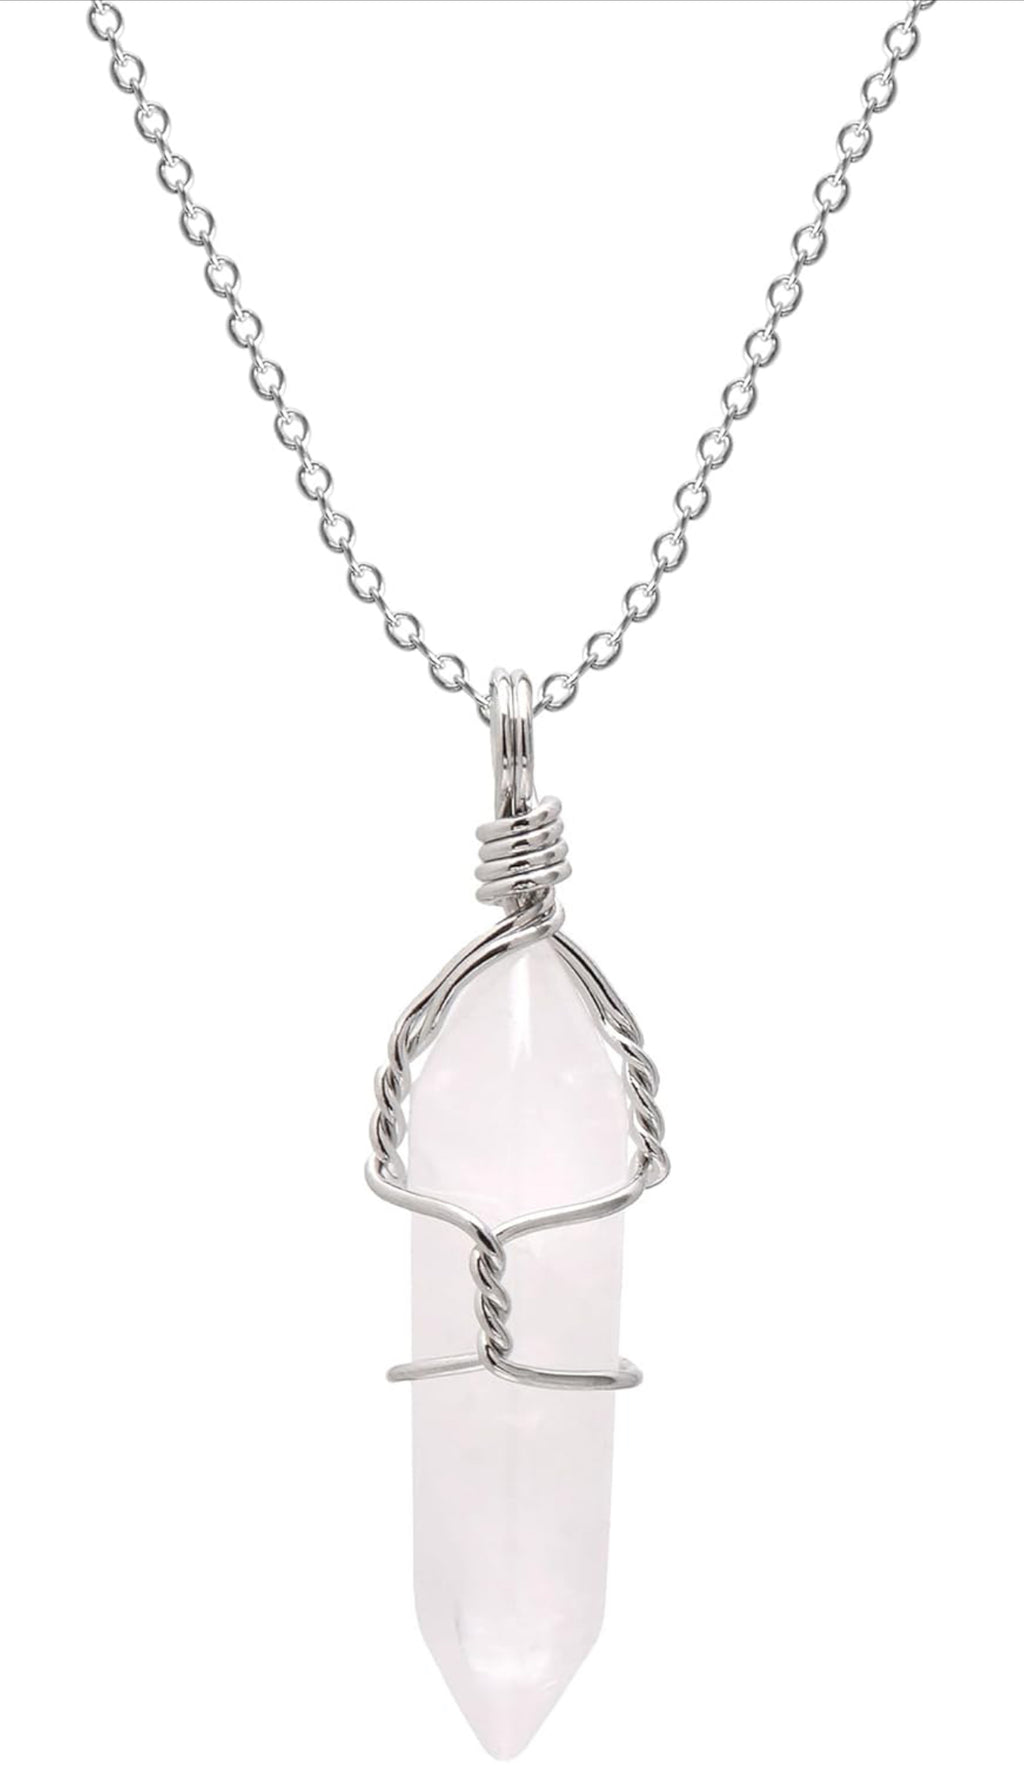 Opalite and Silver-Wrapped Pendant Necklace